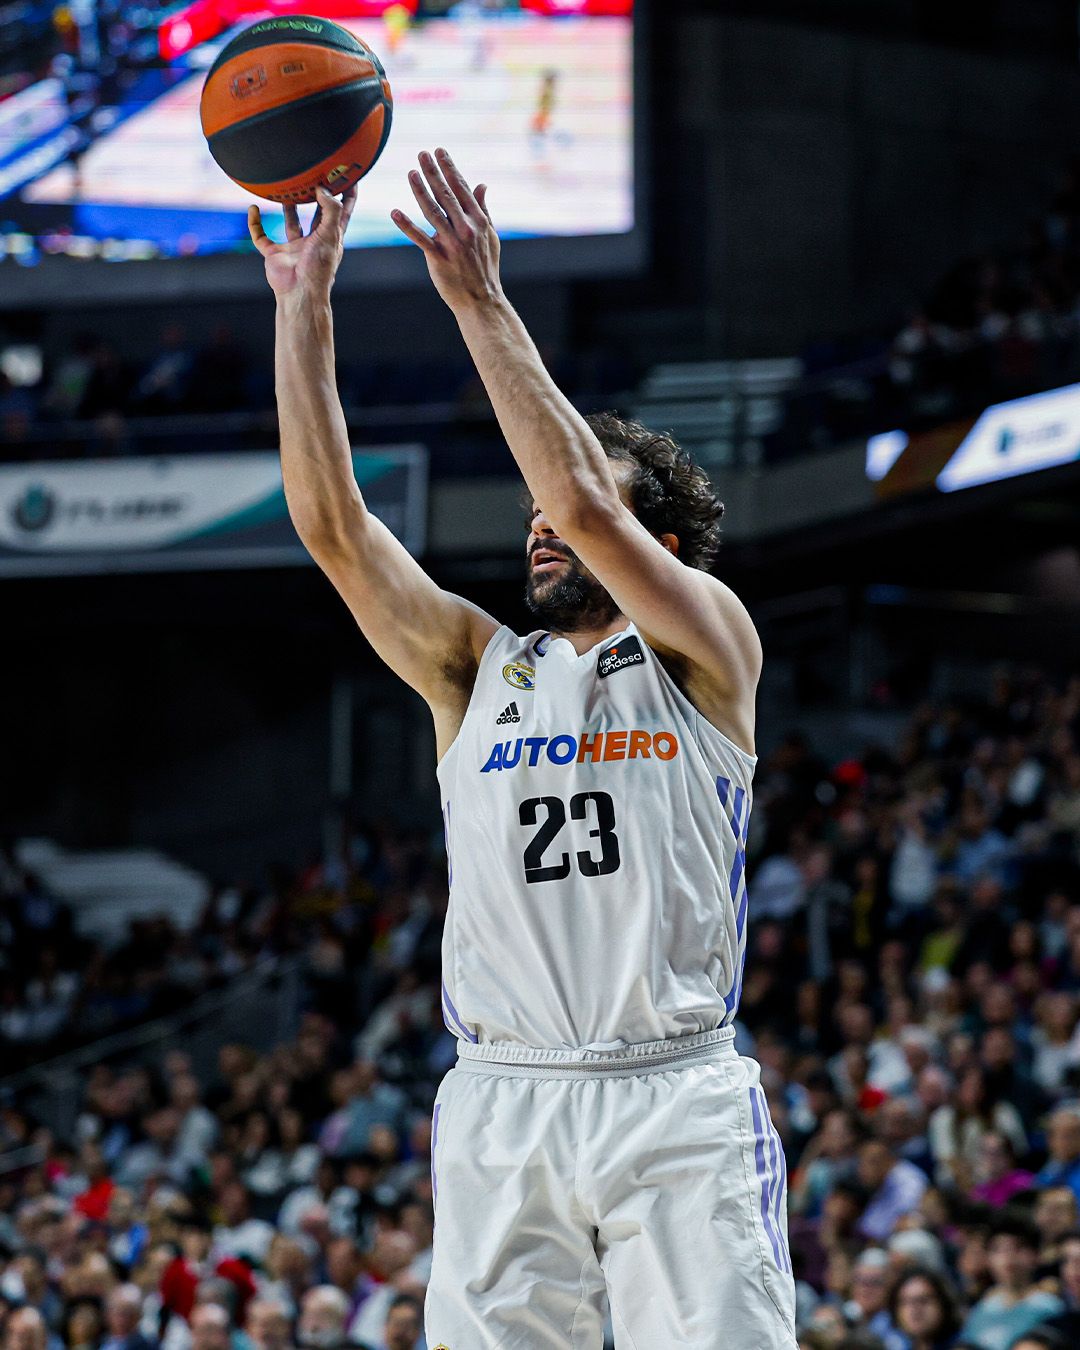 Llull becomes Real's all time leading scorer in the ACB period